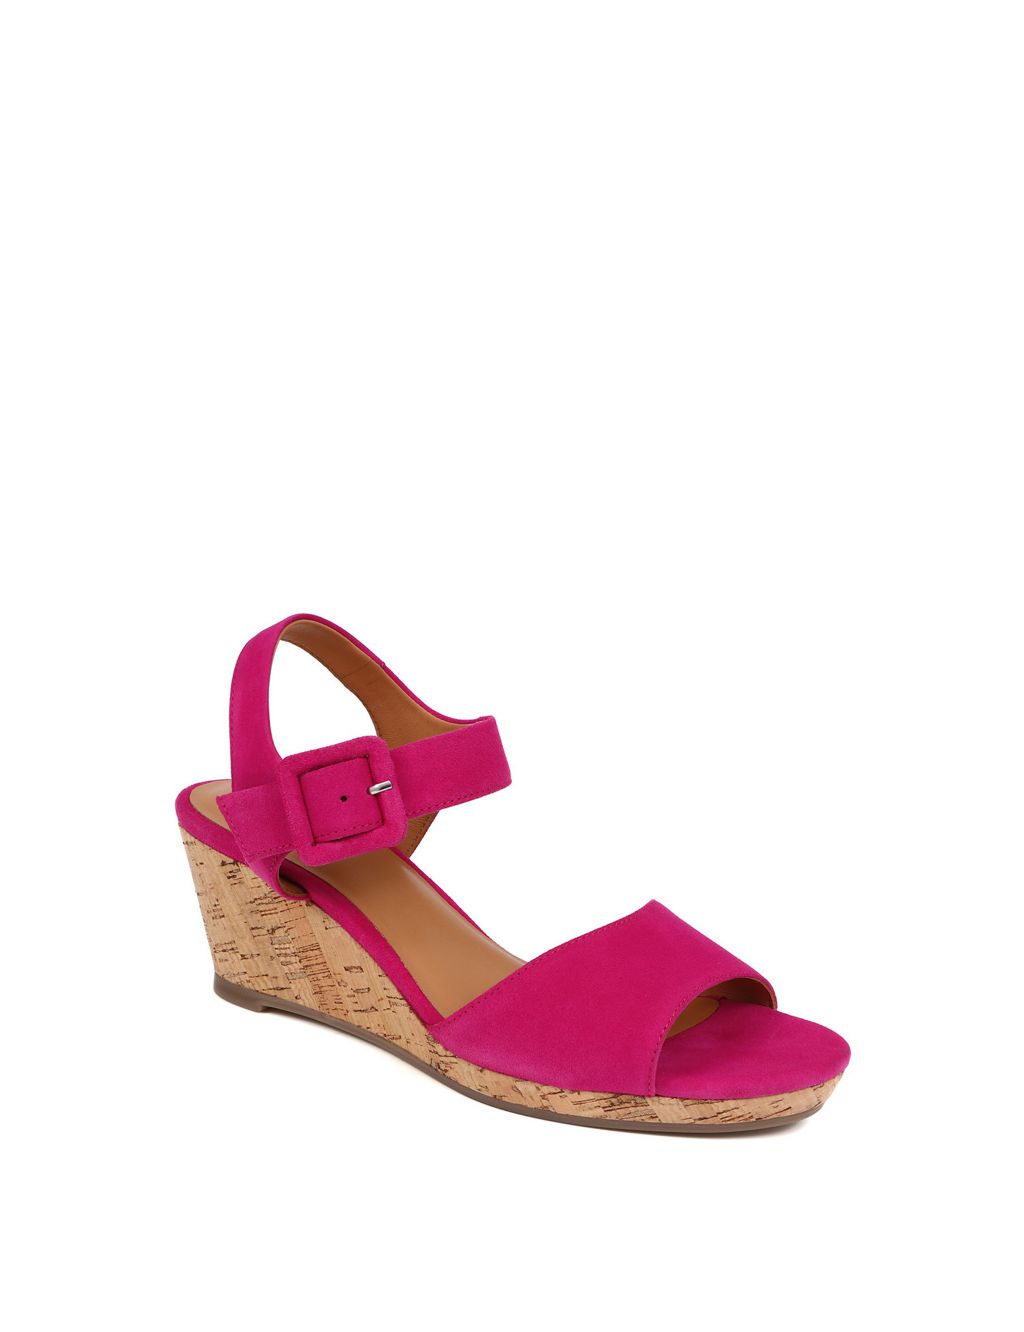 Suede Ankle Strap Wedge Sandals image 3